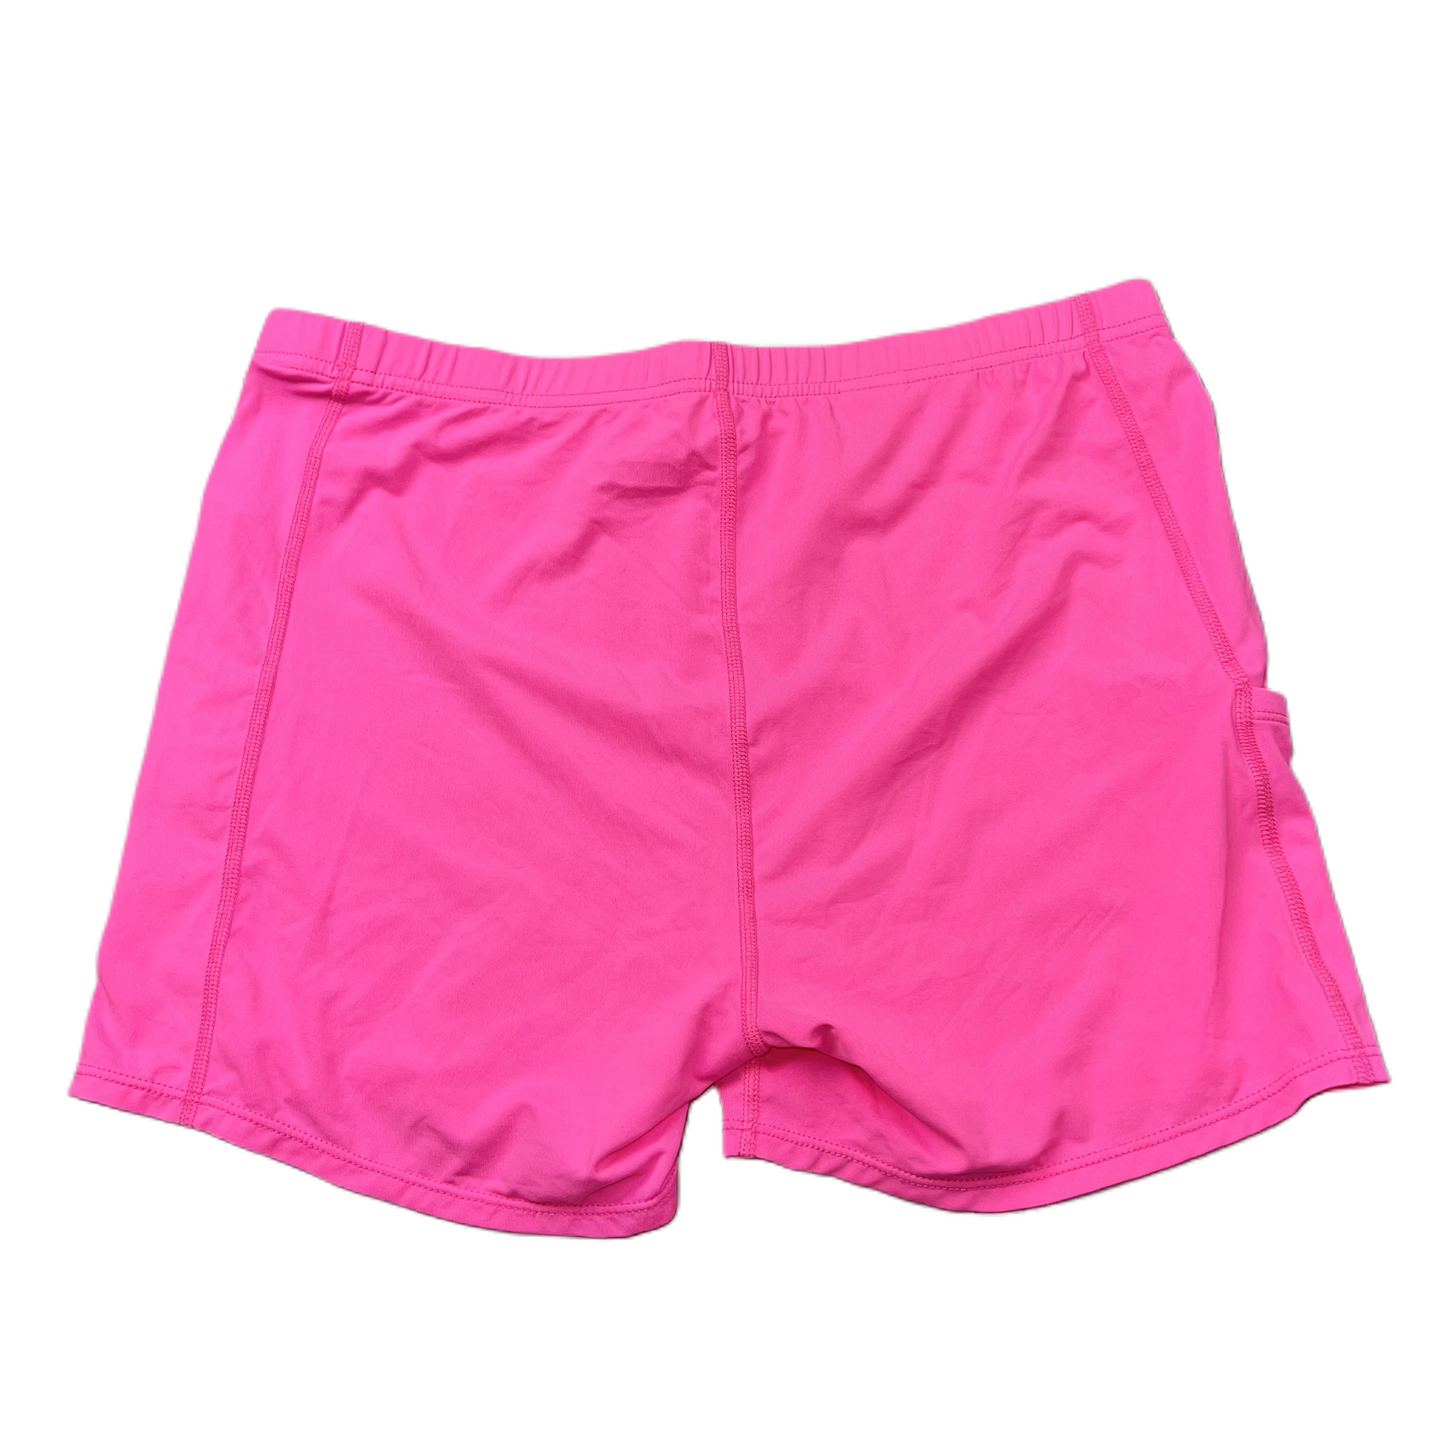 Pink Shorts Designer By Lilly Pulitzer, Size: M